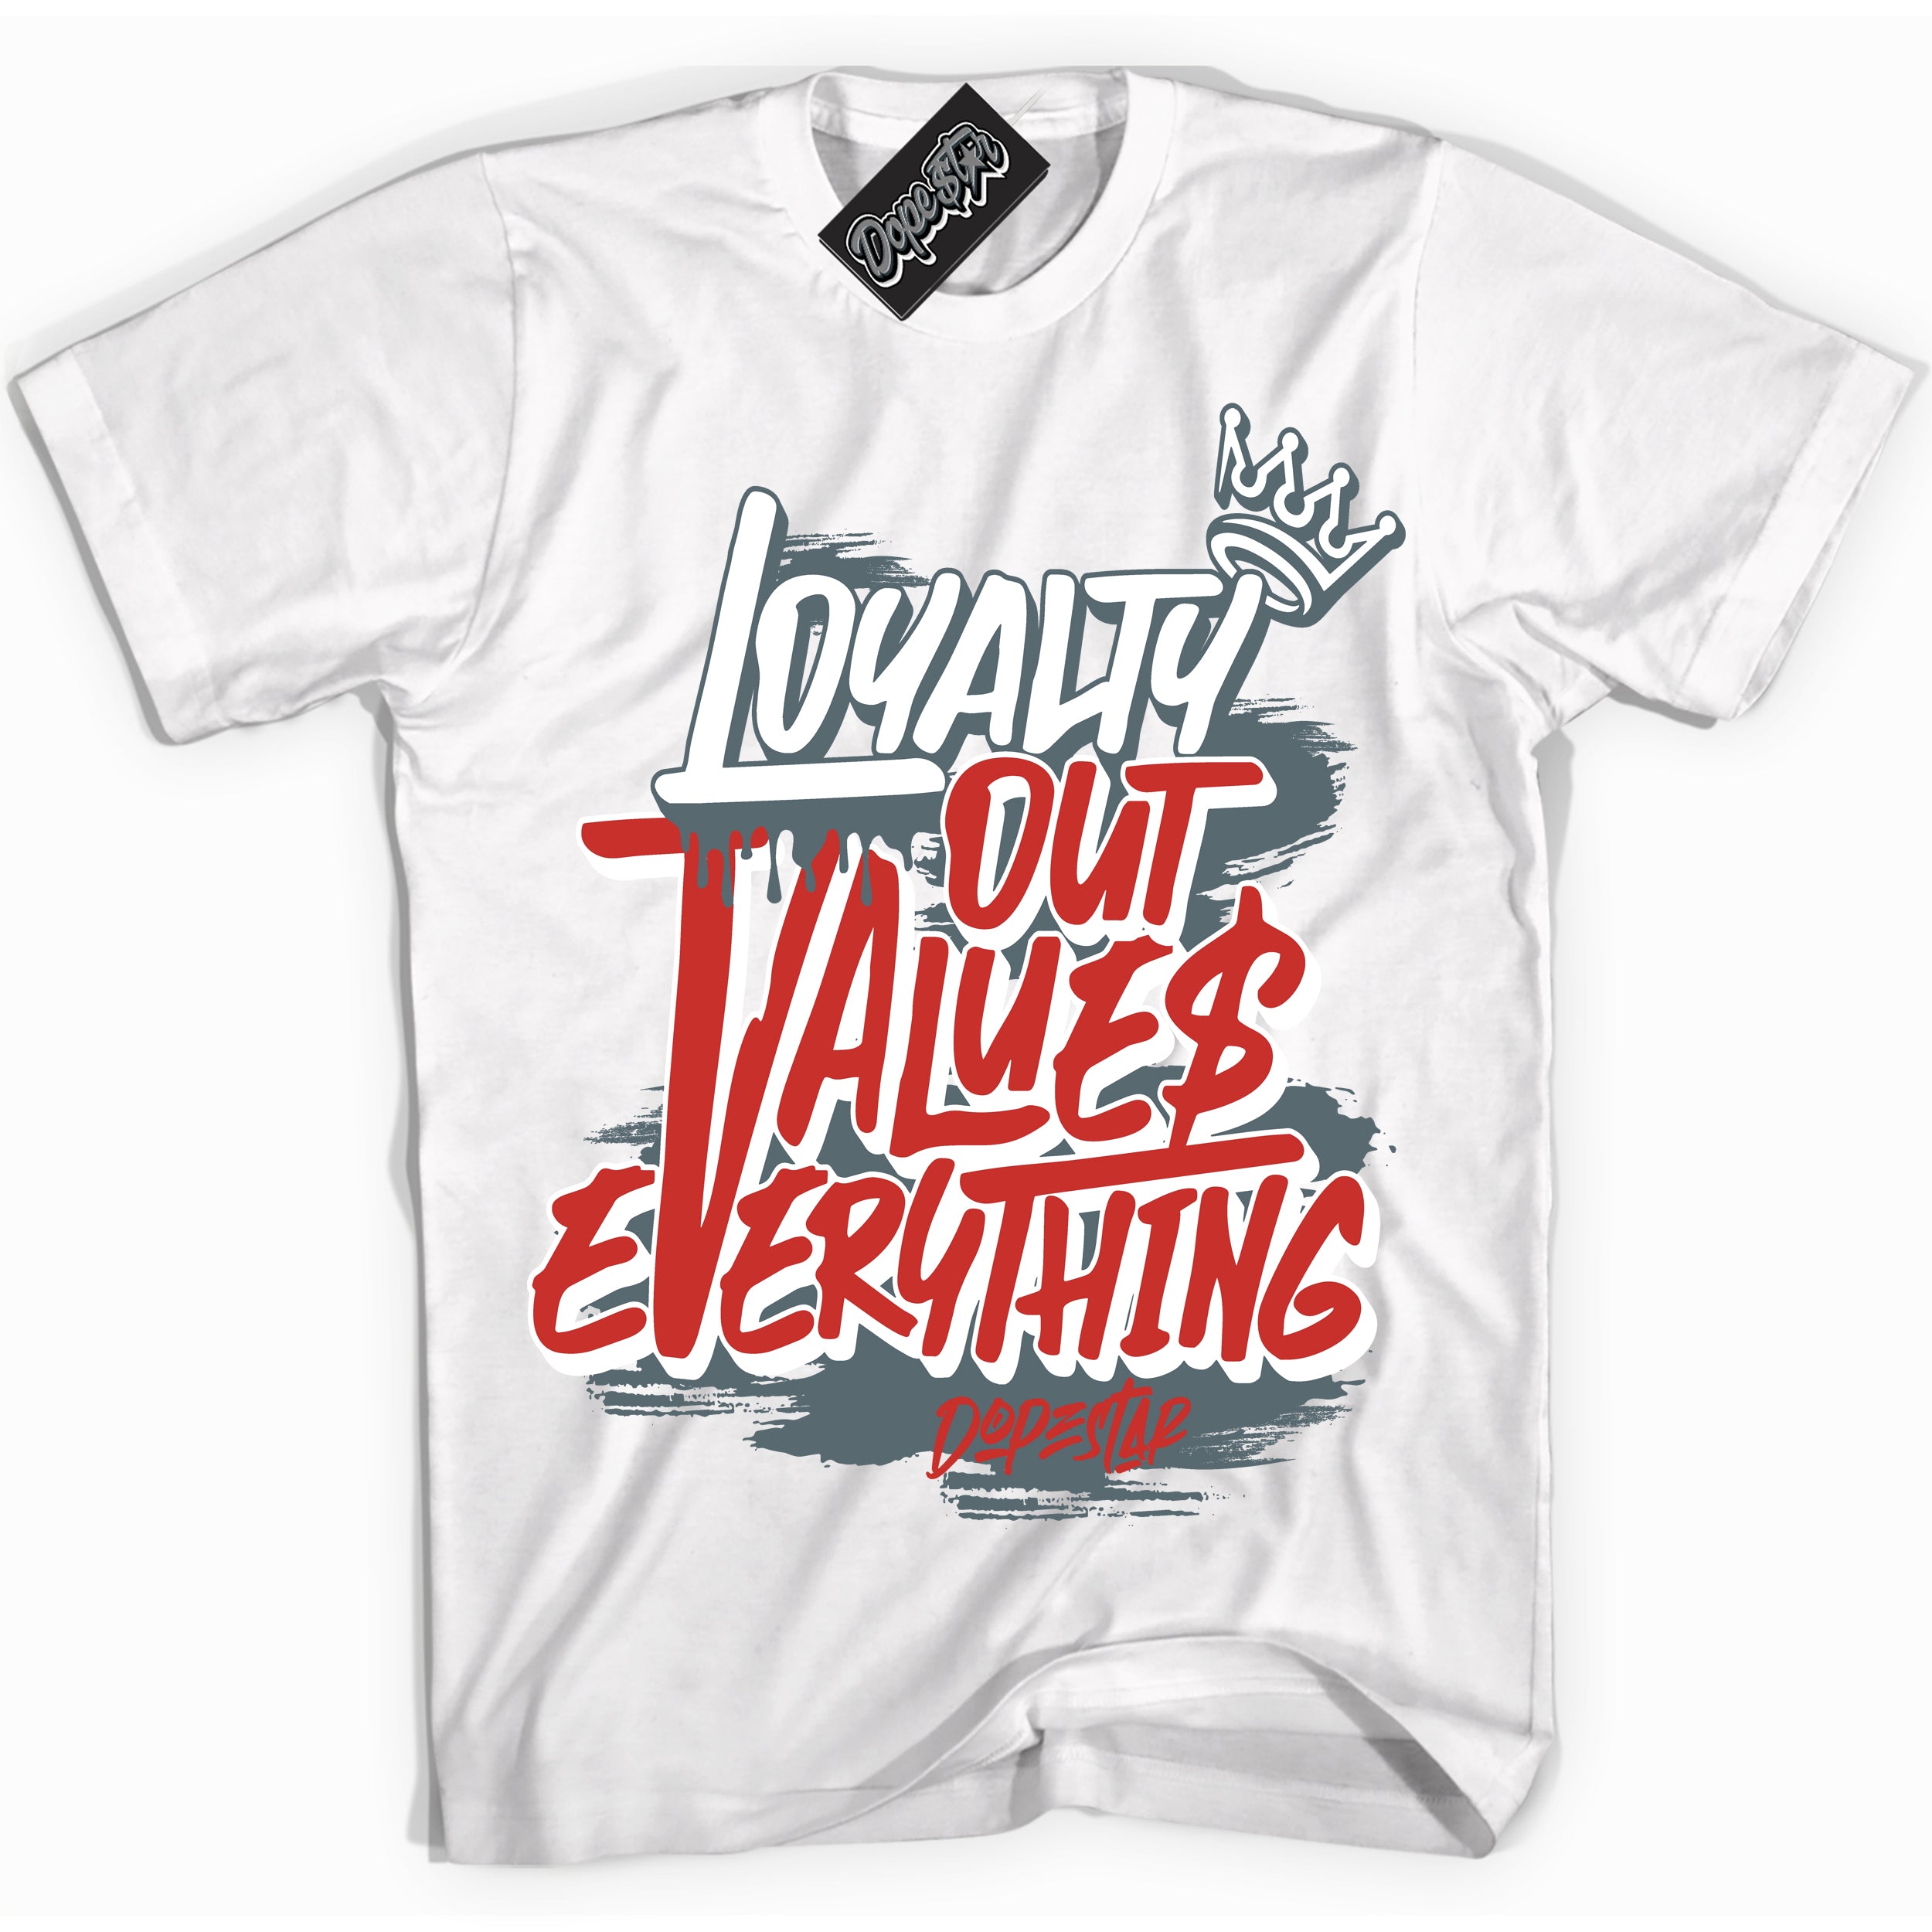 Cool White Shirt with “ Loyalty Out Values Everything” design that perfectly matches Red Fire 9s Sneakers.